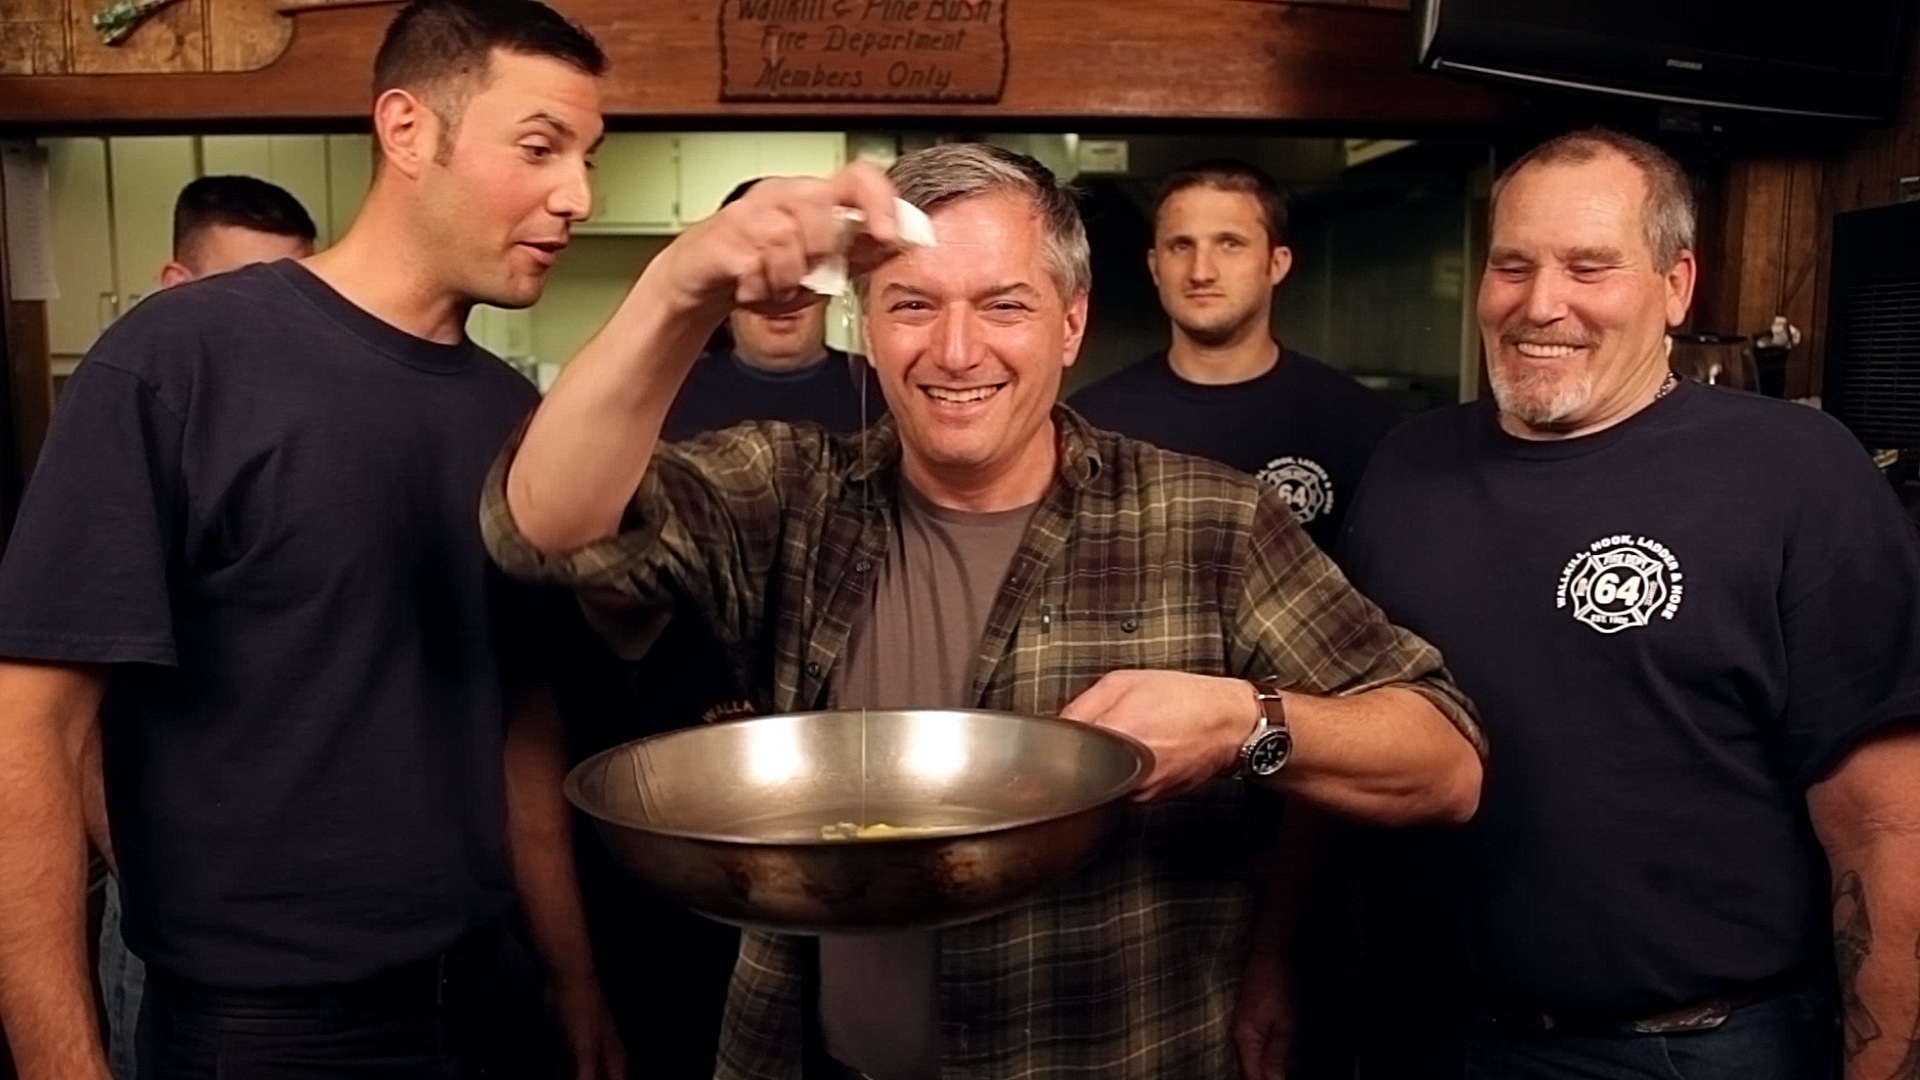 RIDE WITH US - In the Kitchen with the Wallkill Fire Department